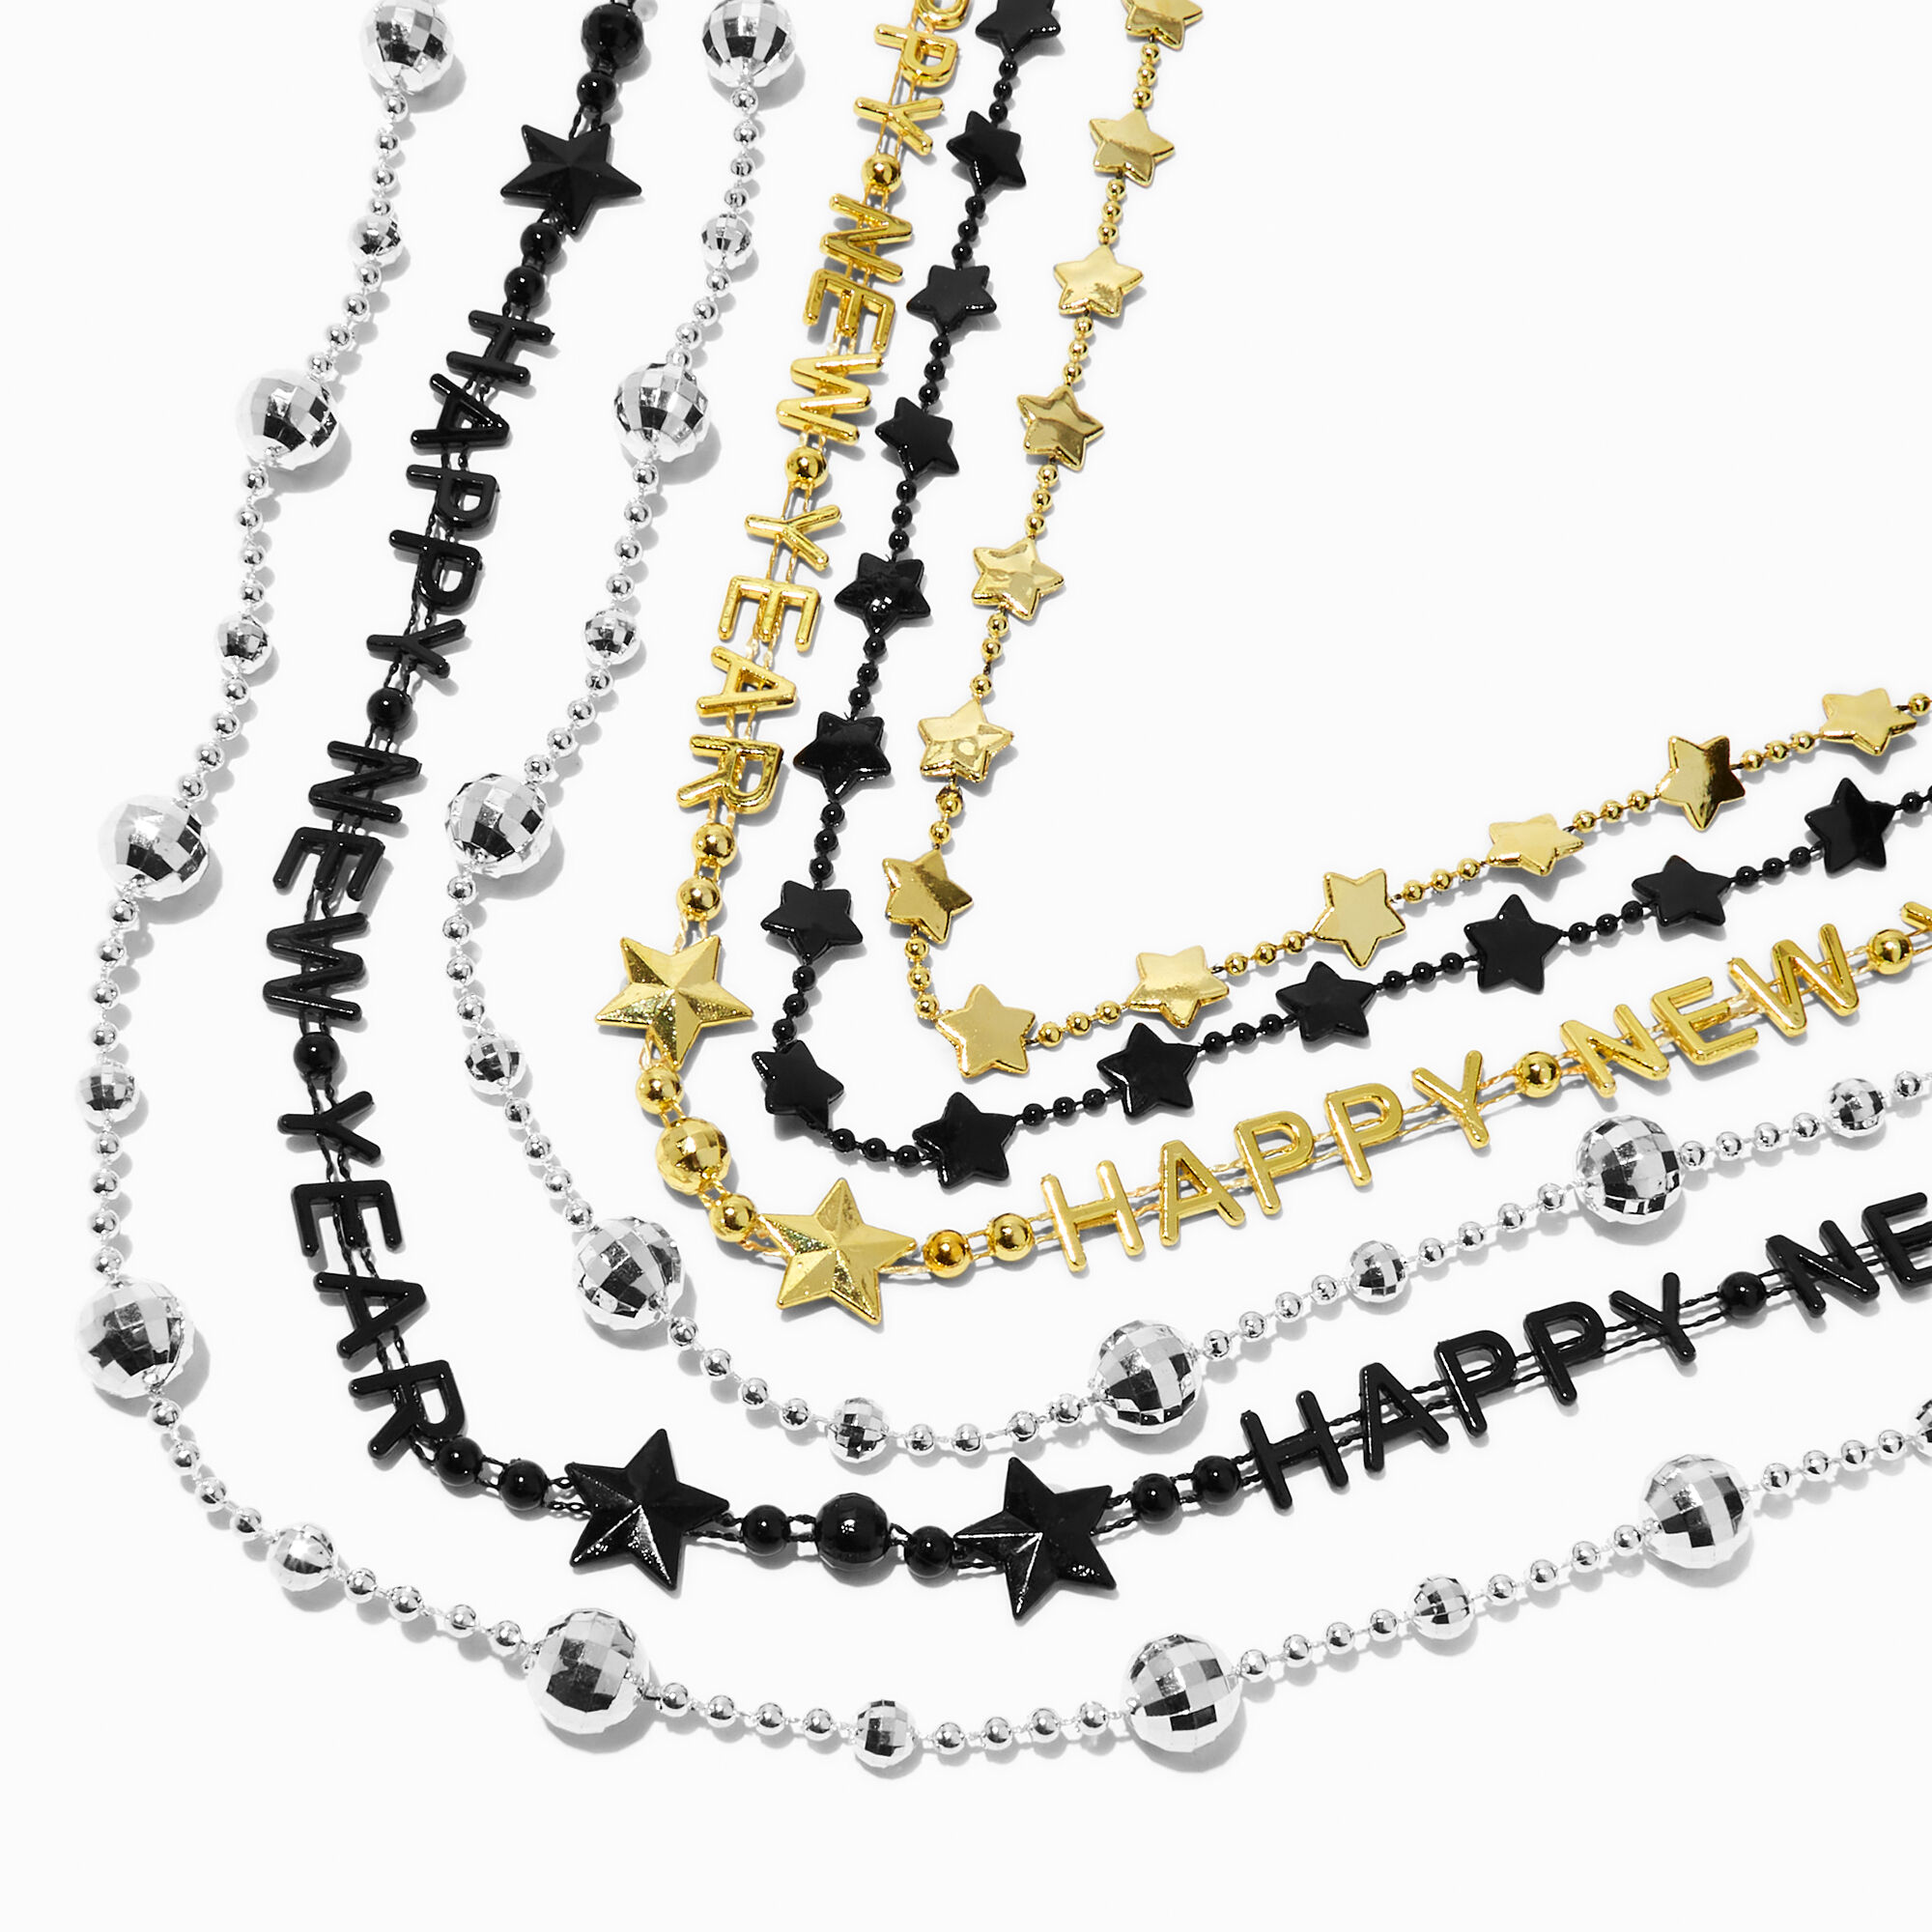 View Claires happy New Year Beaded Necklaces 6 Pack information